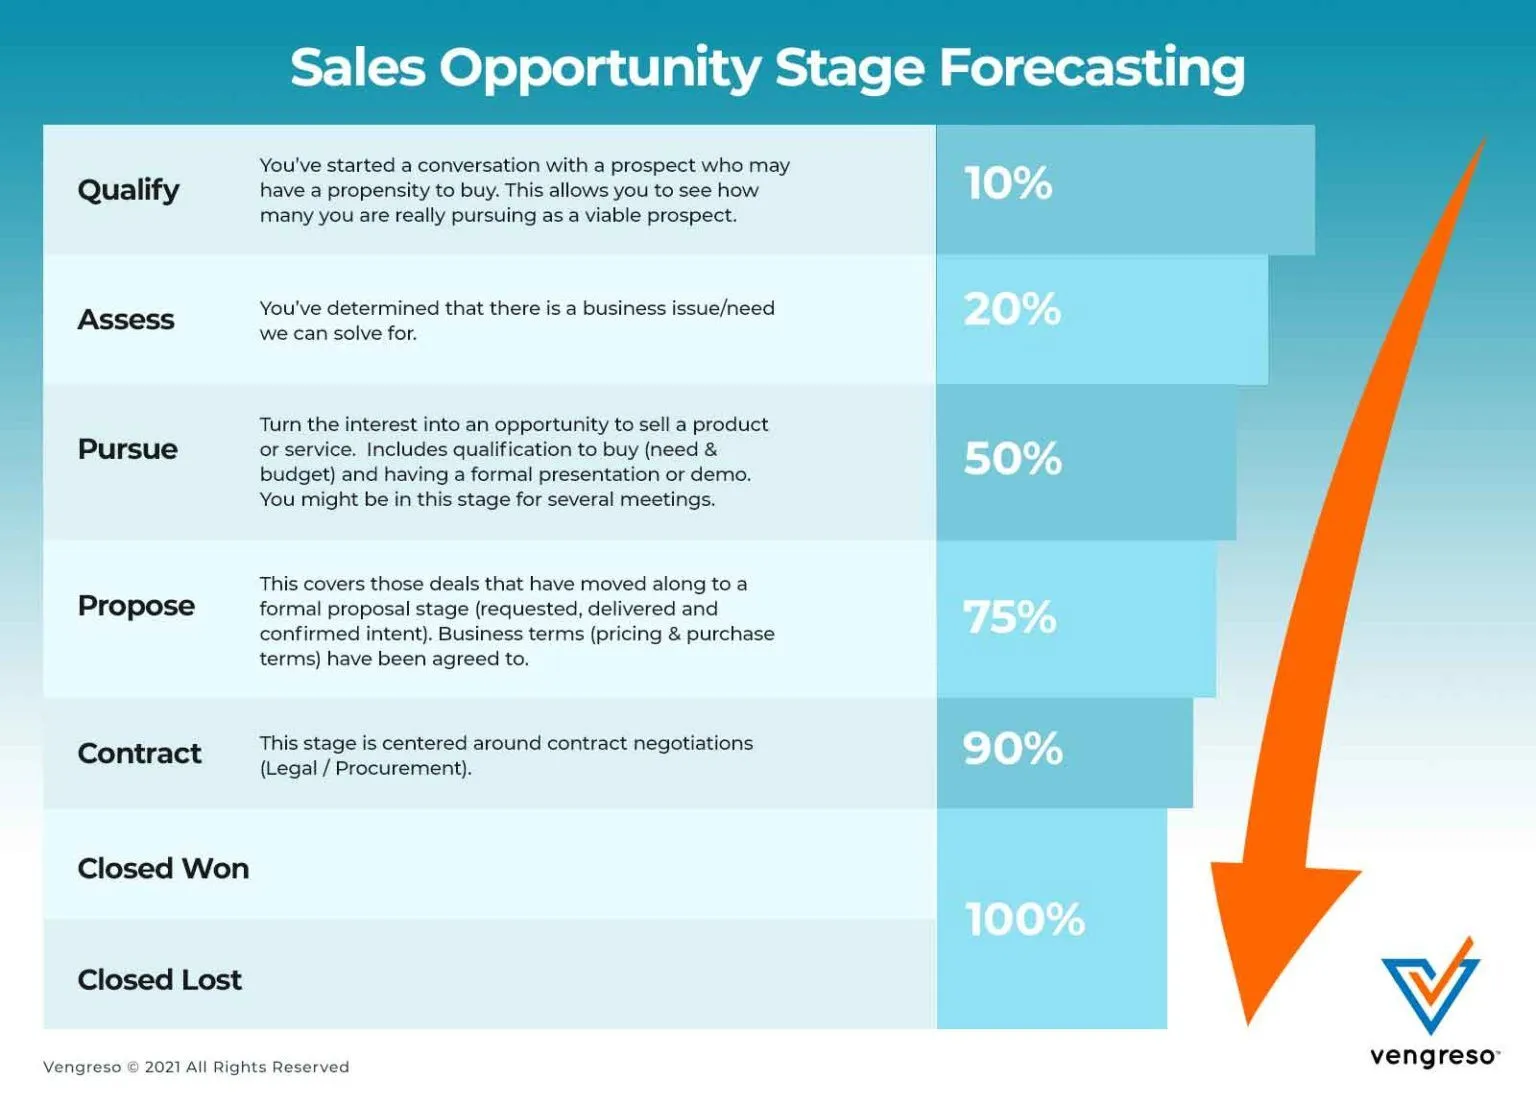 Sales opportunity forecasting